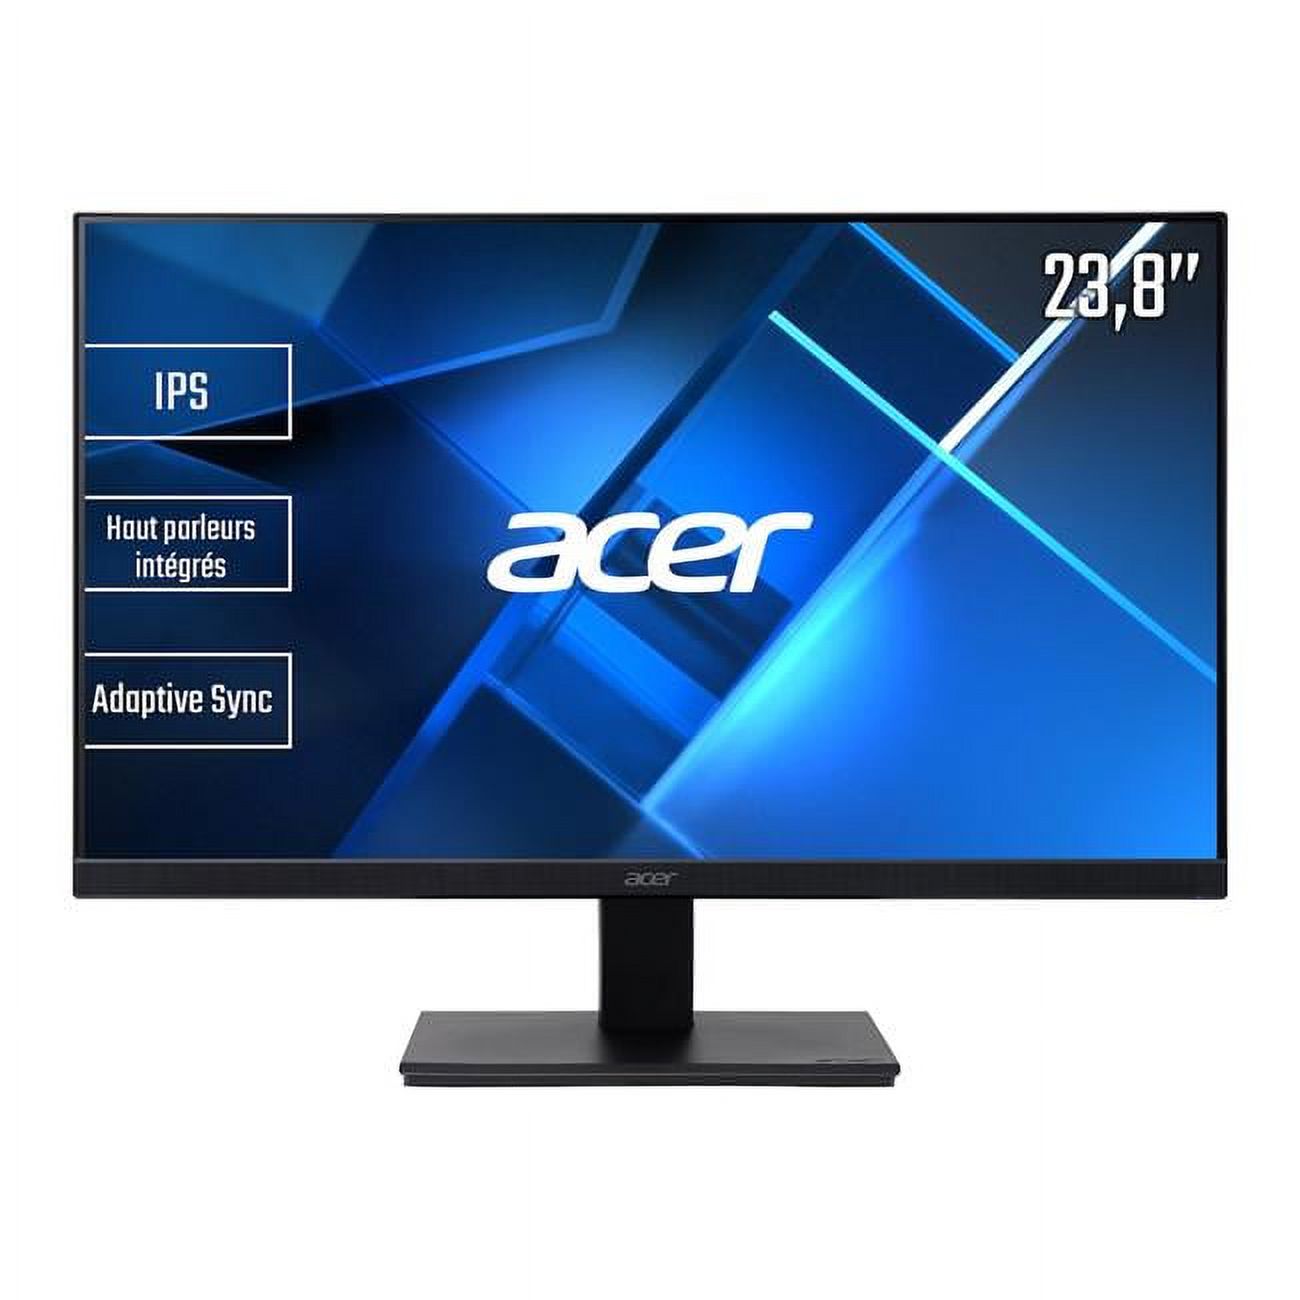 Acer V247Y A Full HD LCD Monitor, 16:9, Black - image 1 of 7